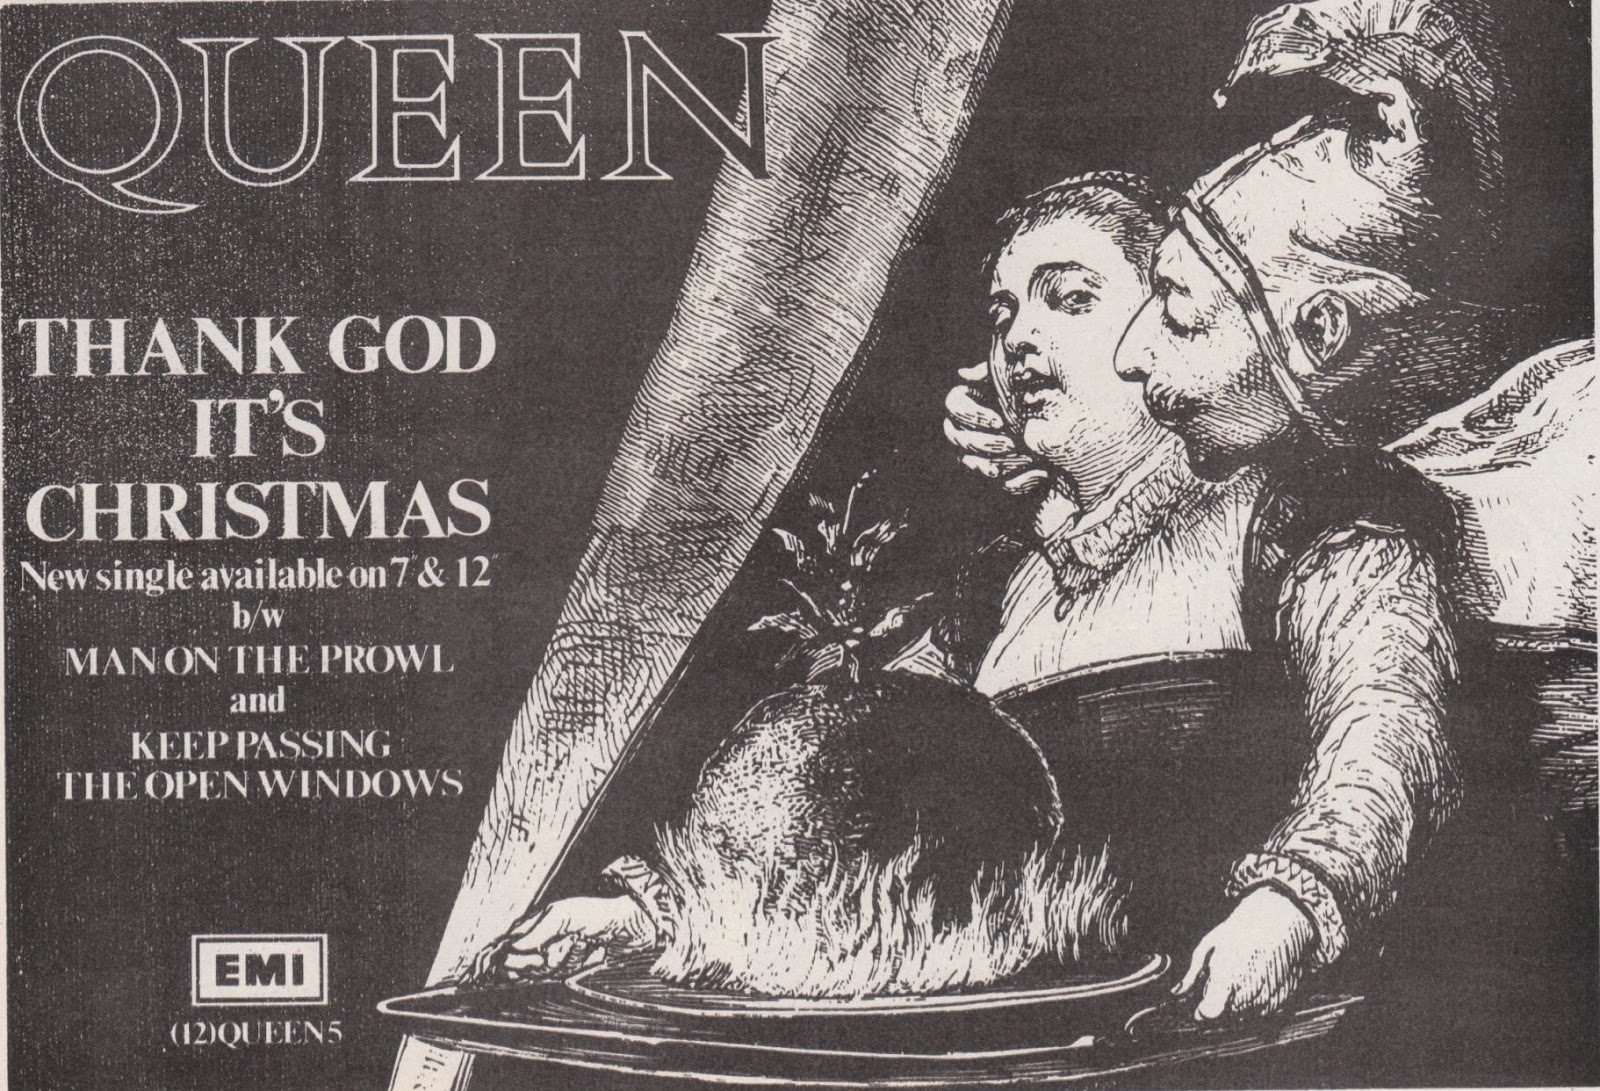 Top Of The Pops 80s: Queen - Thank God It's Christmas - 1984